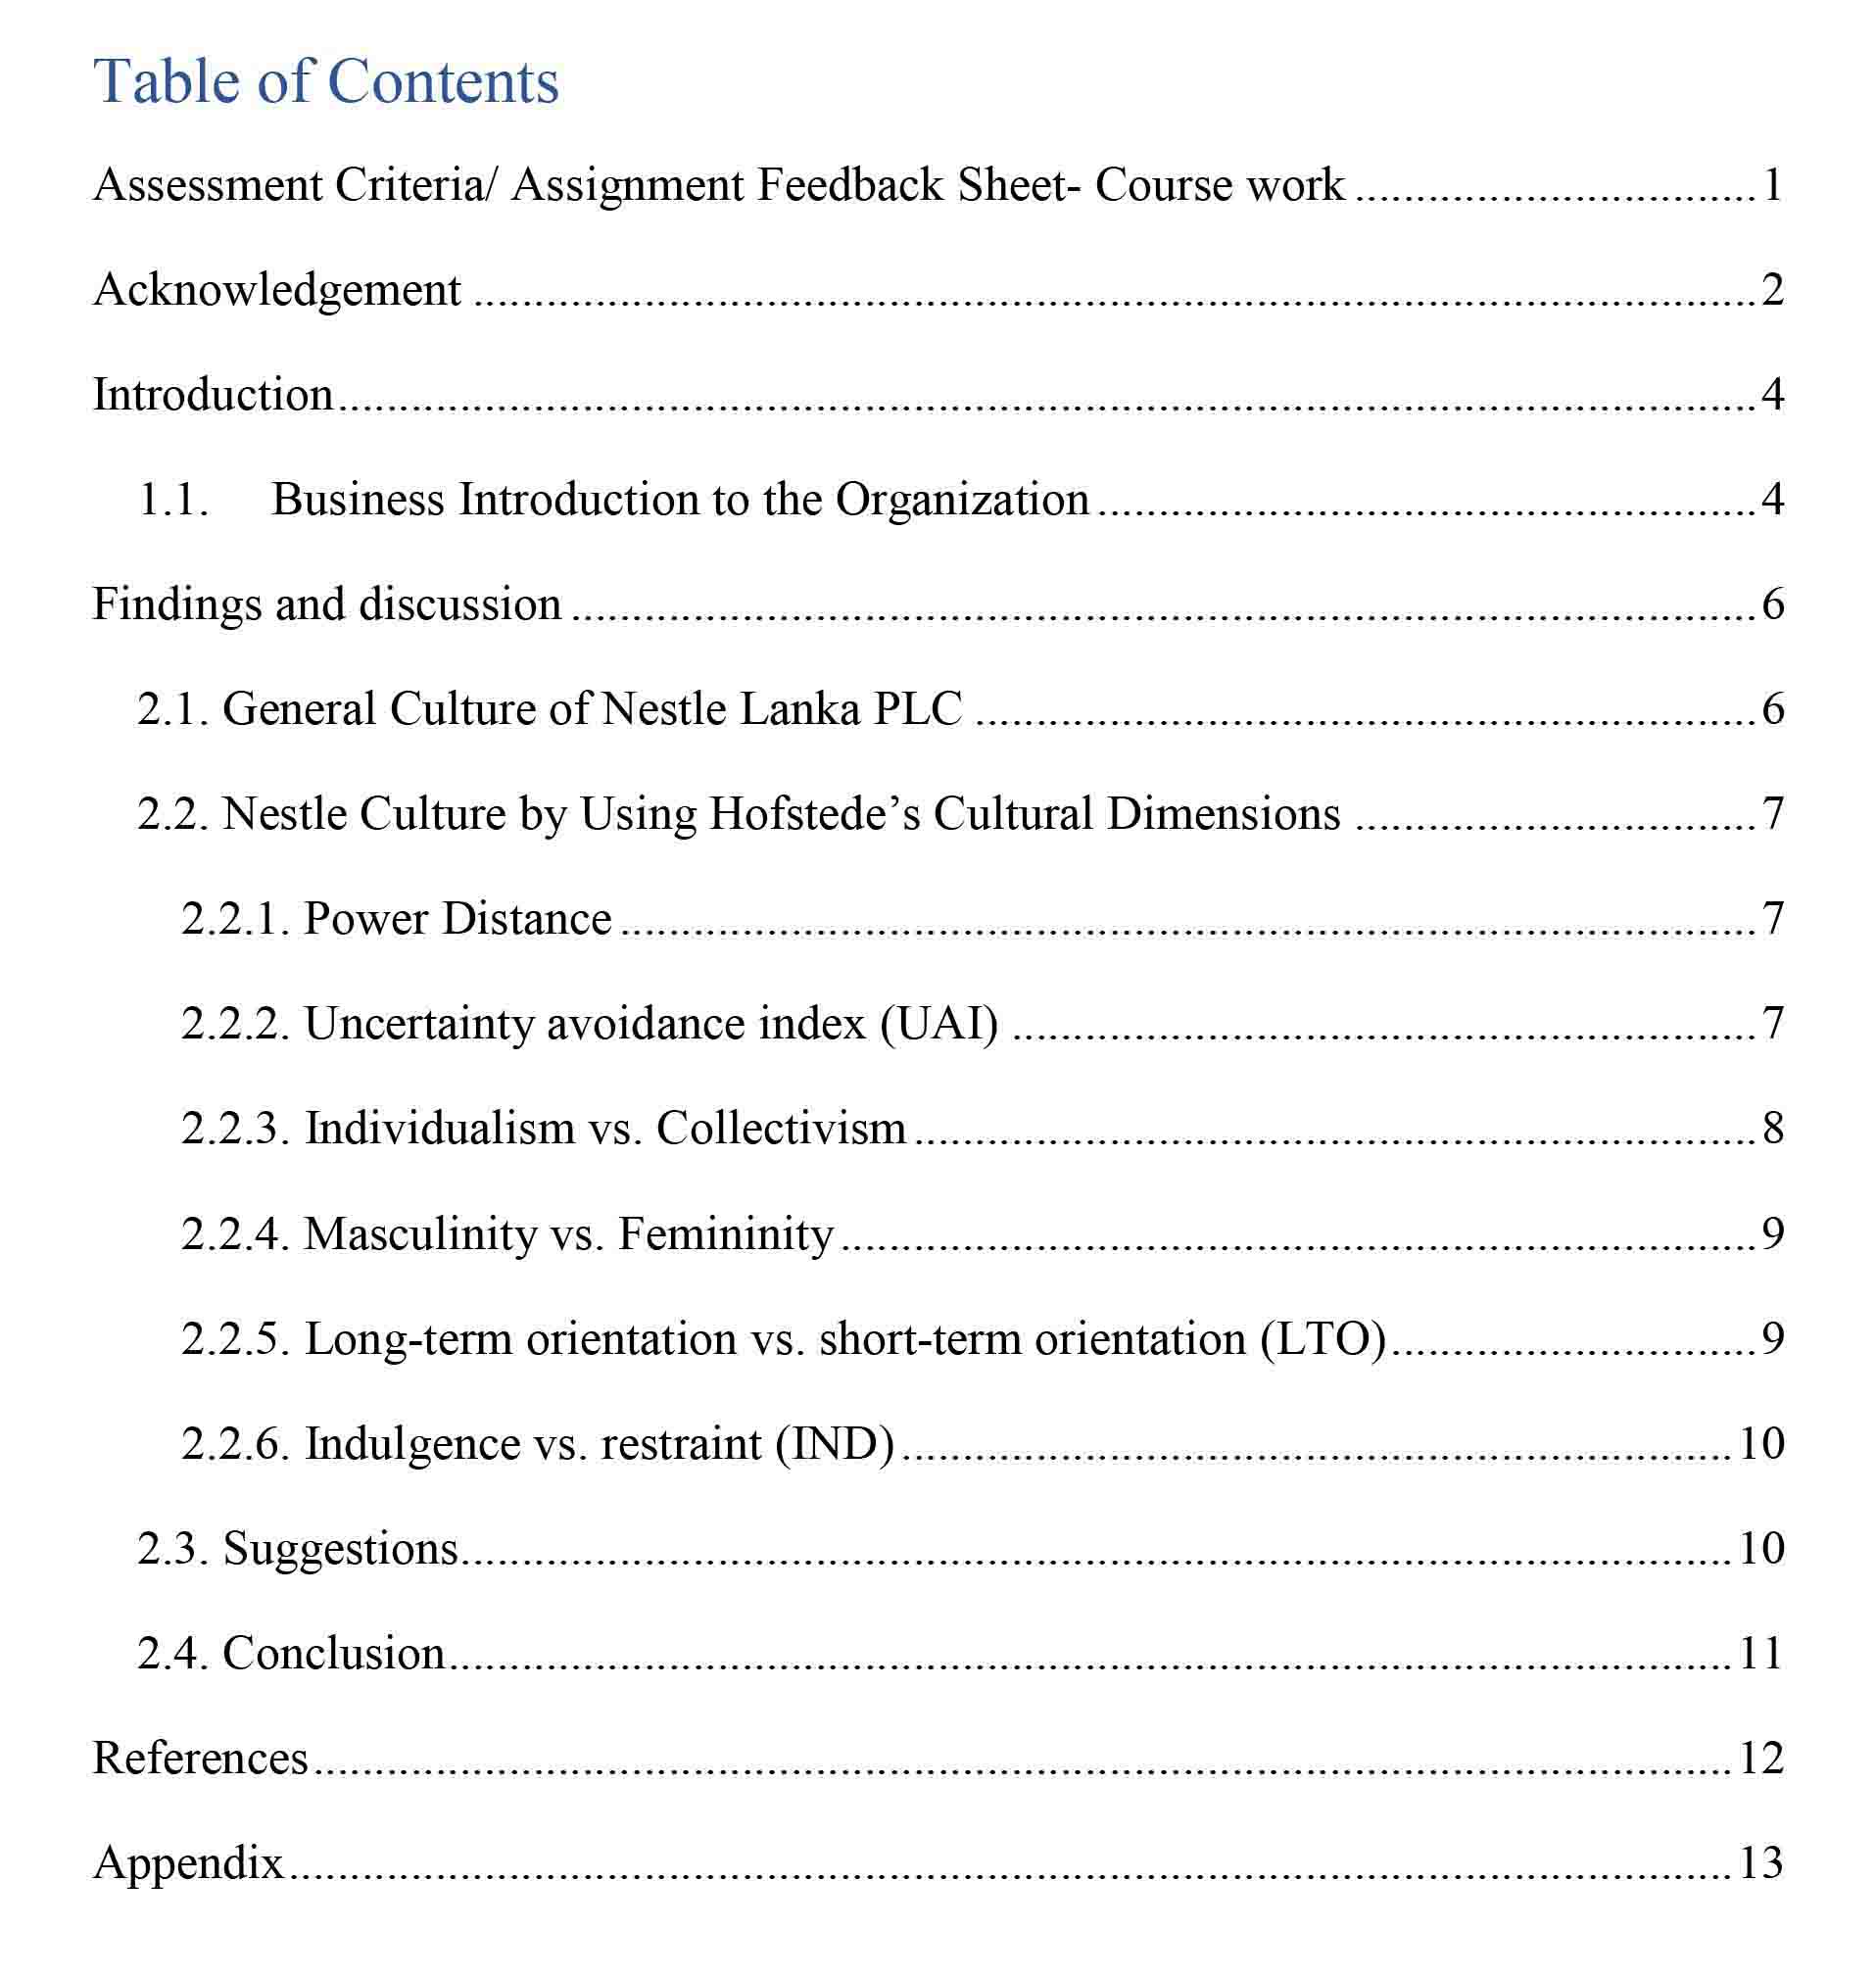 sample table of contents for research report